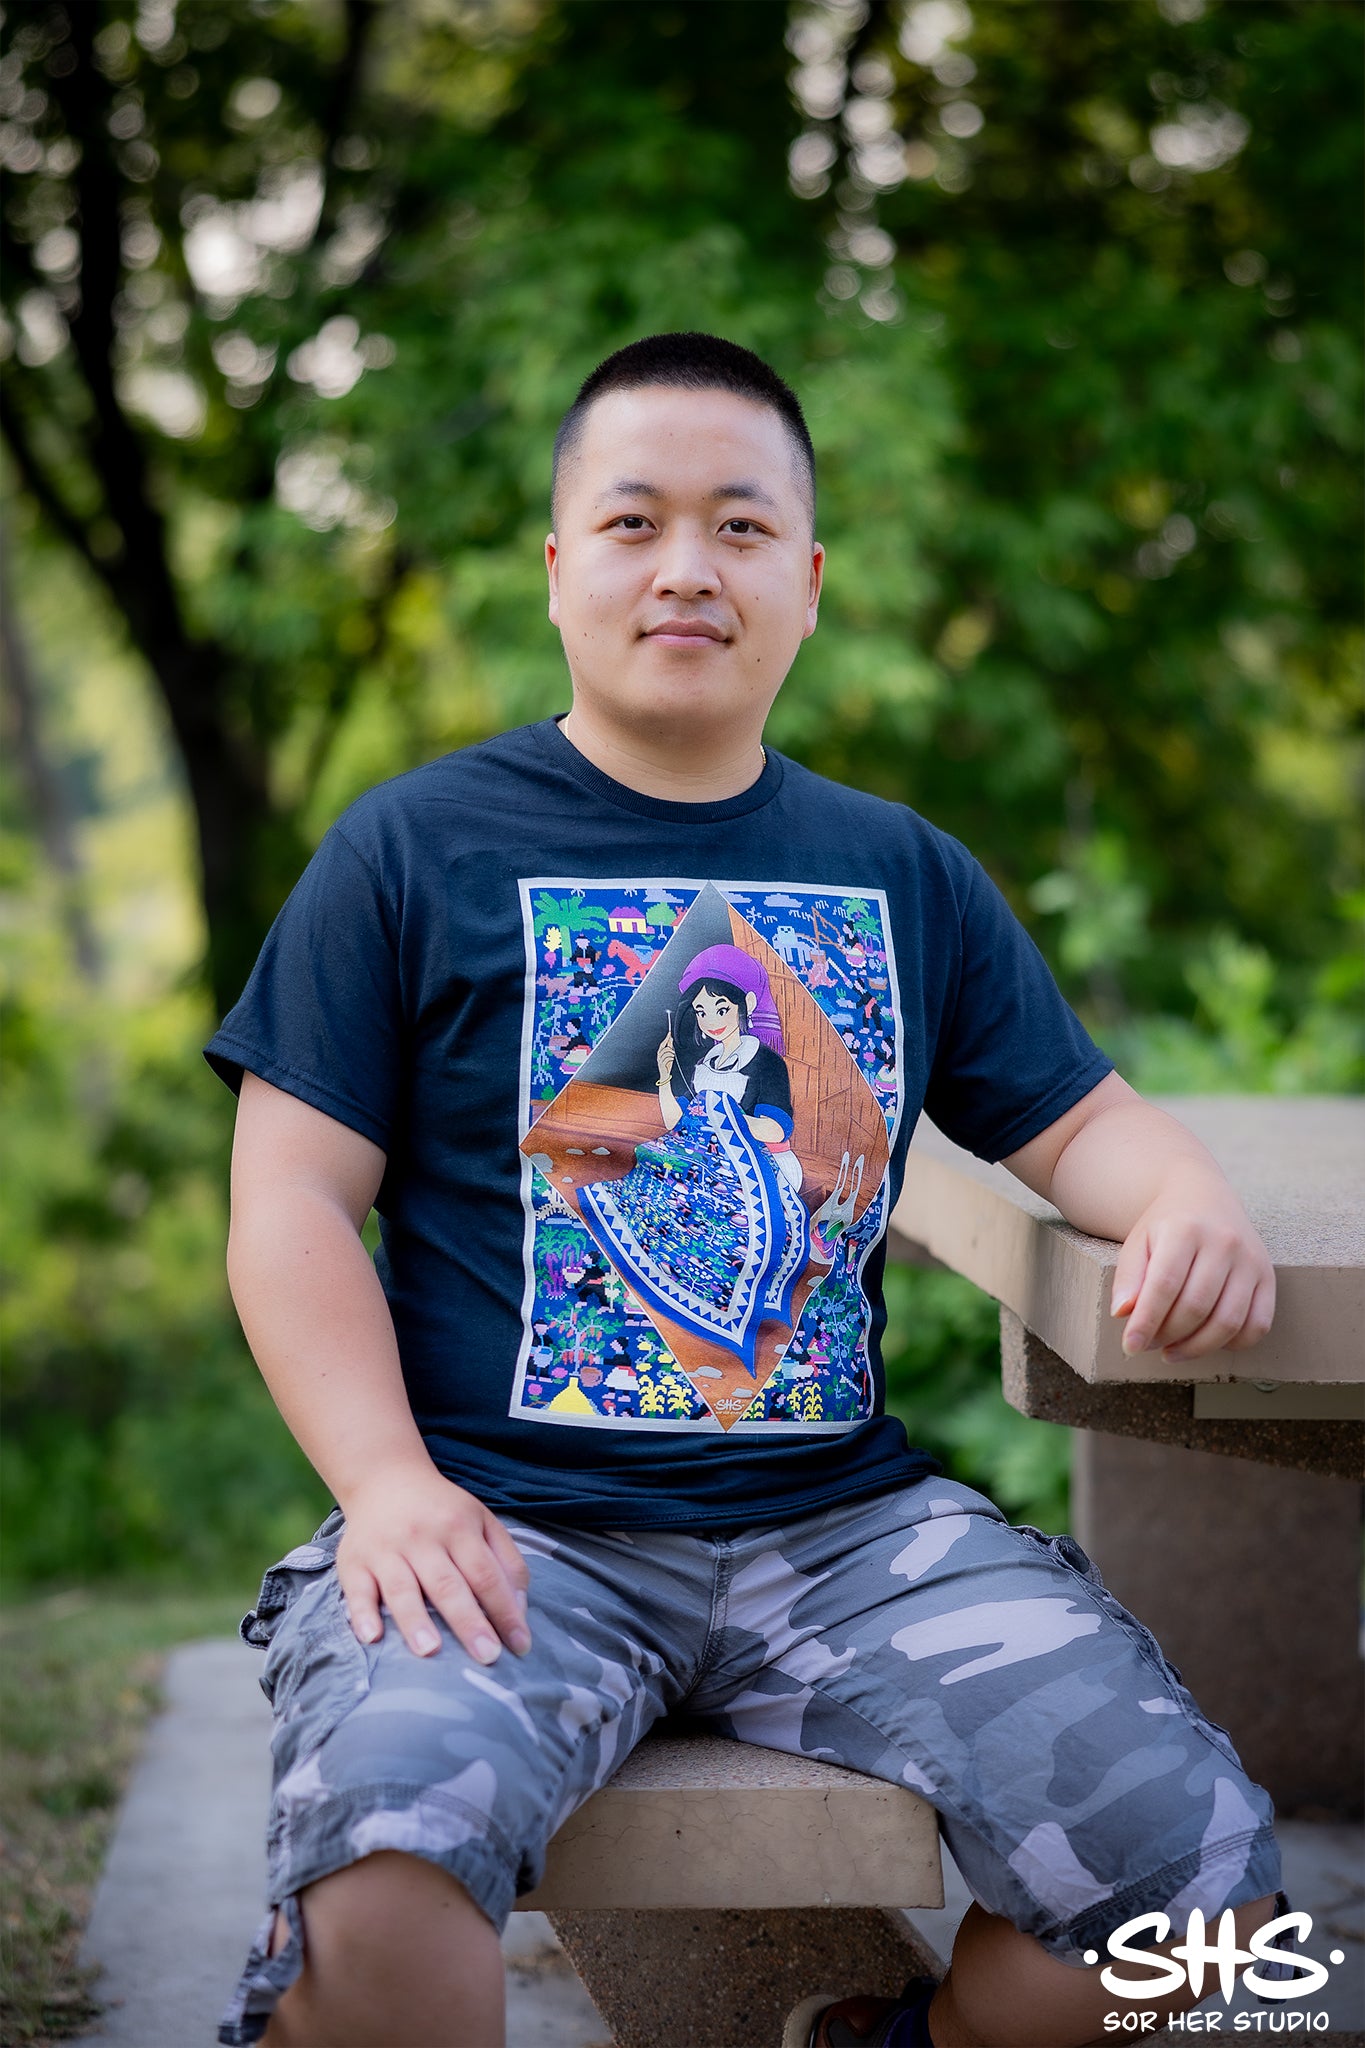 Hmong Lady Sowing Story Cloth Tshirt